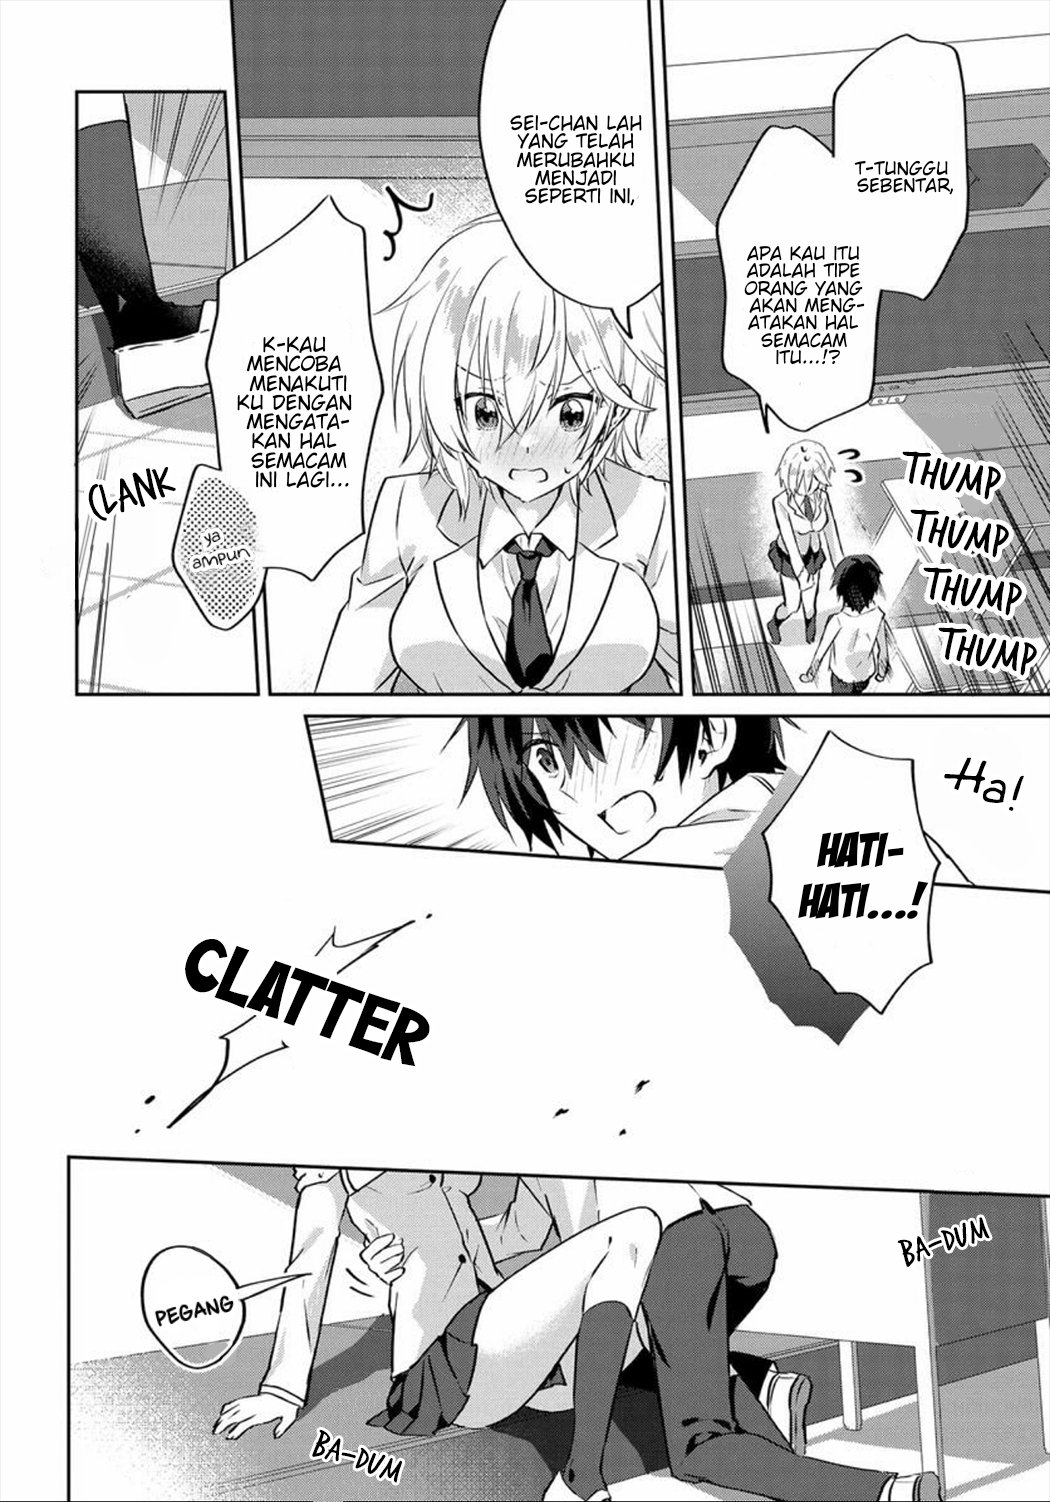 Since I'Ve Entered The World Of Romantic Comedy Manga, I'Ll Do My Best To Make The Losing Heroine Happy. Chapter 1 - 249